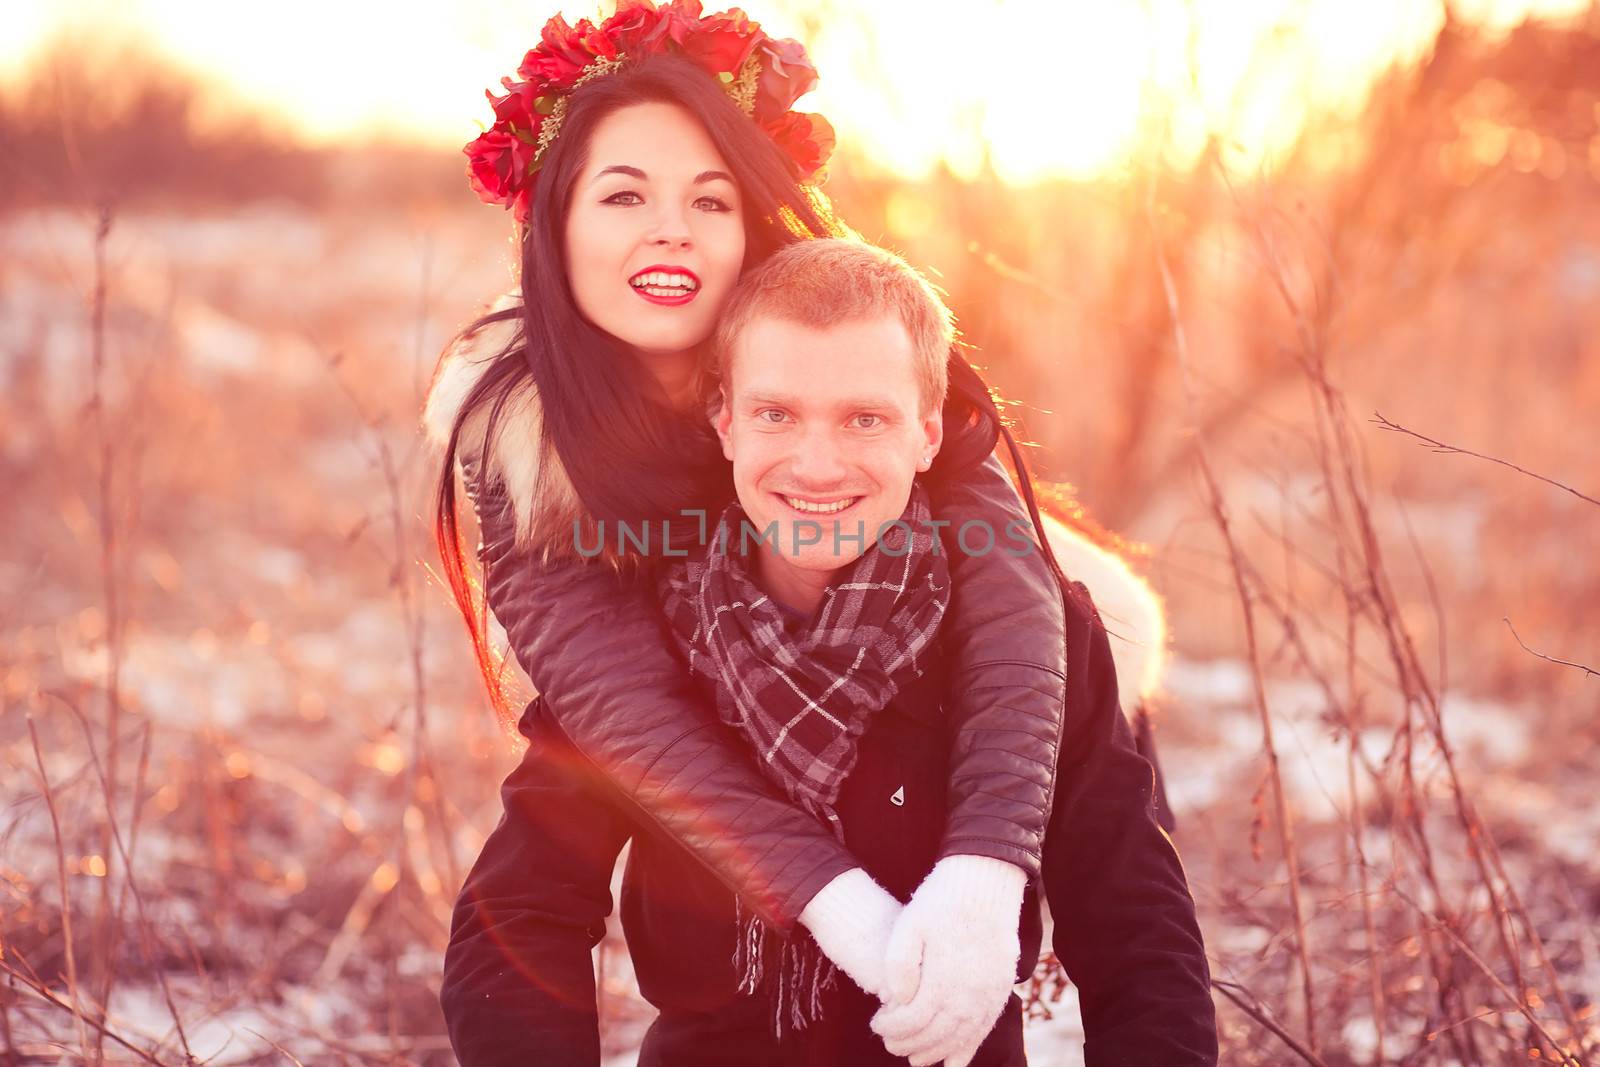 Cheerfull young lovers are smiling and hugging in sunlight